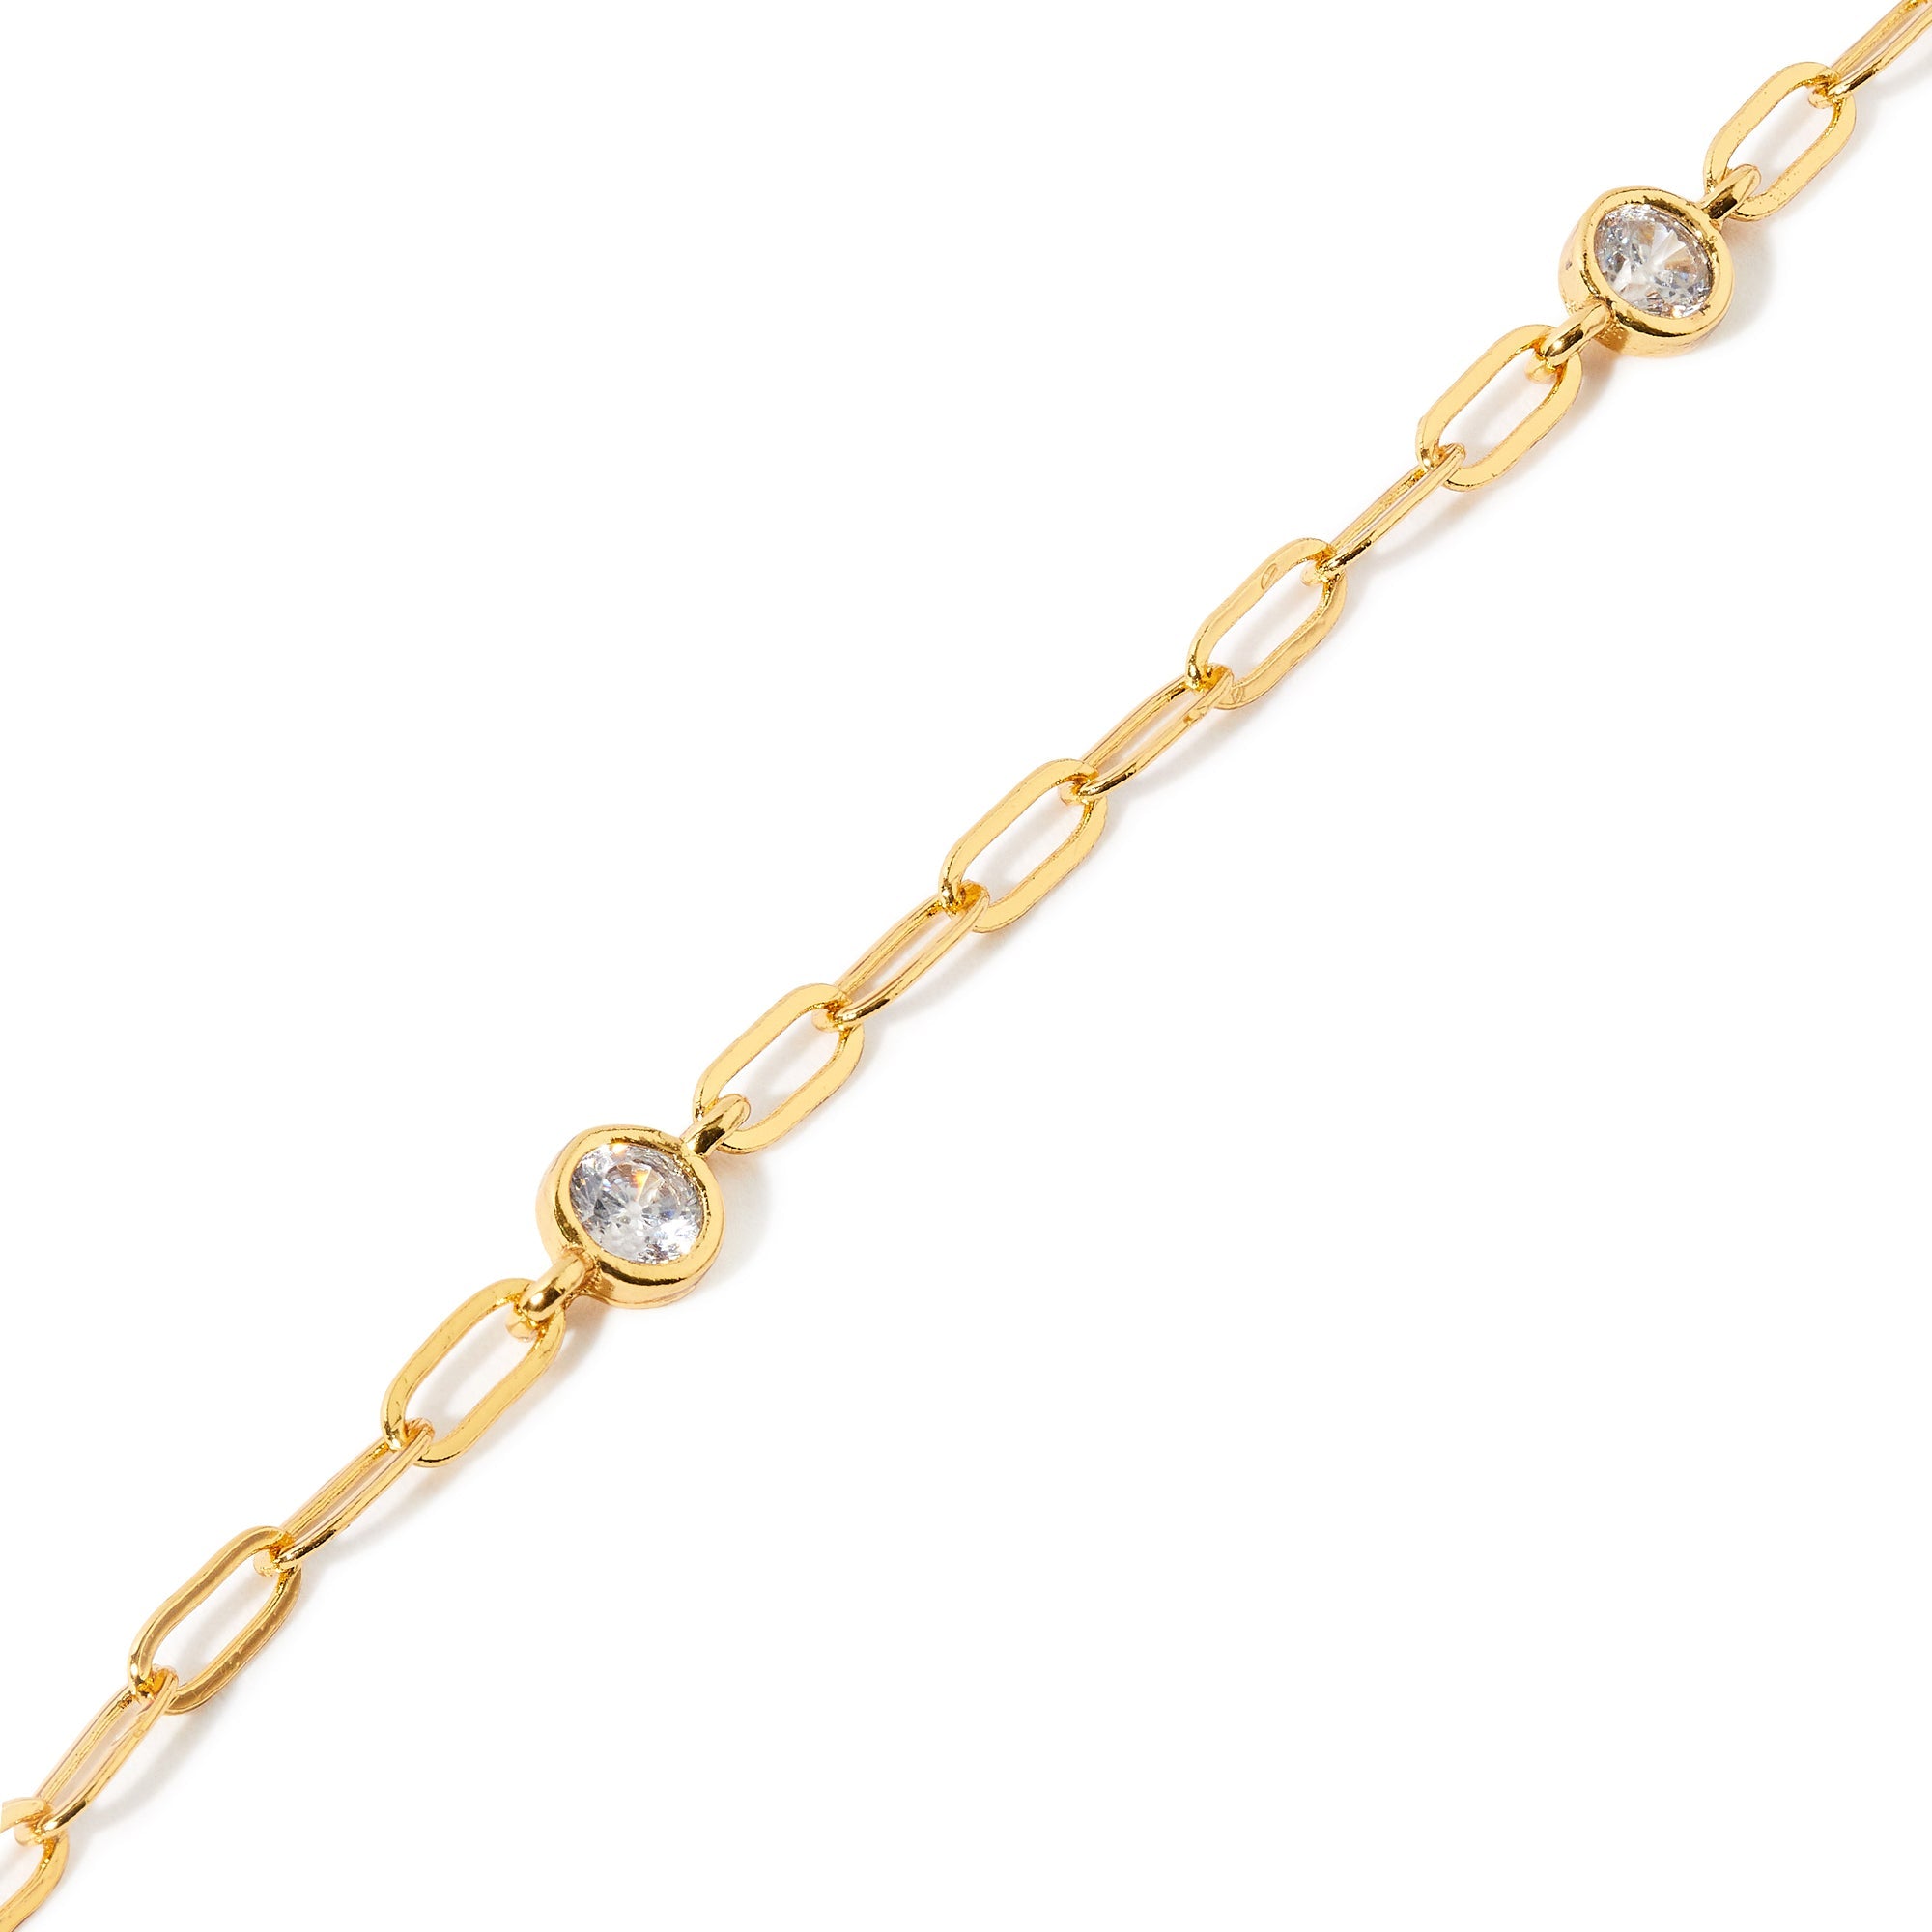 Real Gold Plated Sparkle Chain Bracelet For Women By Accessorize London